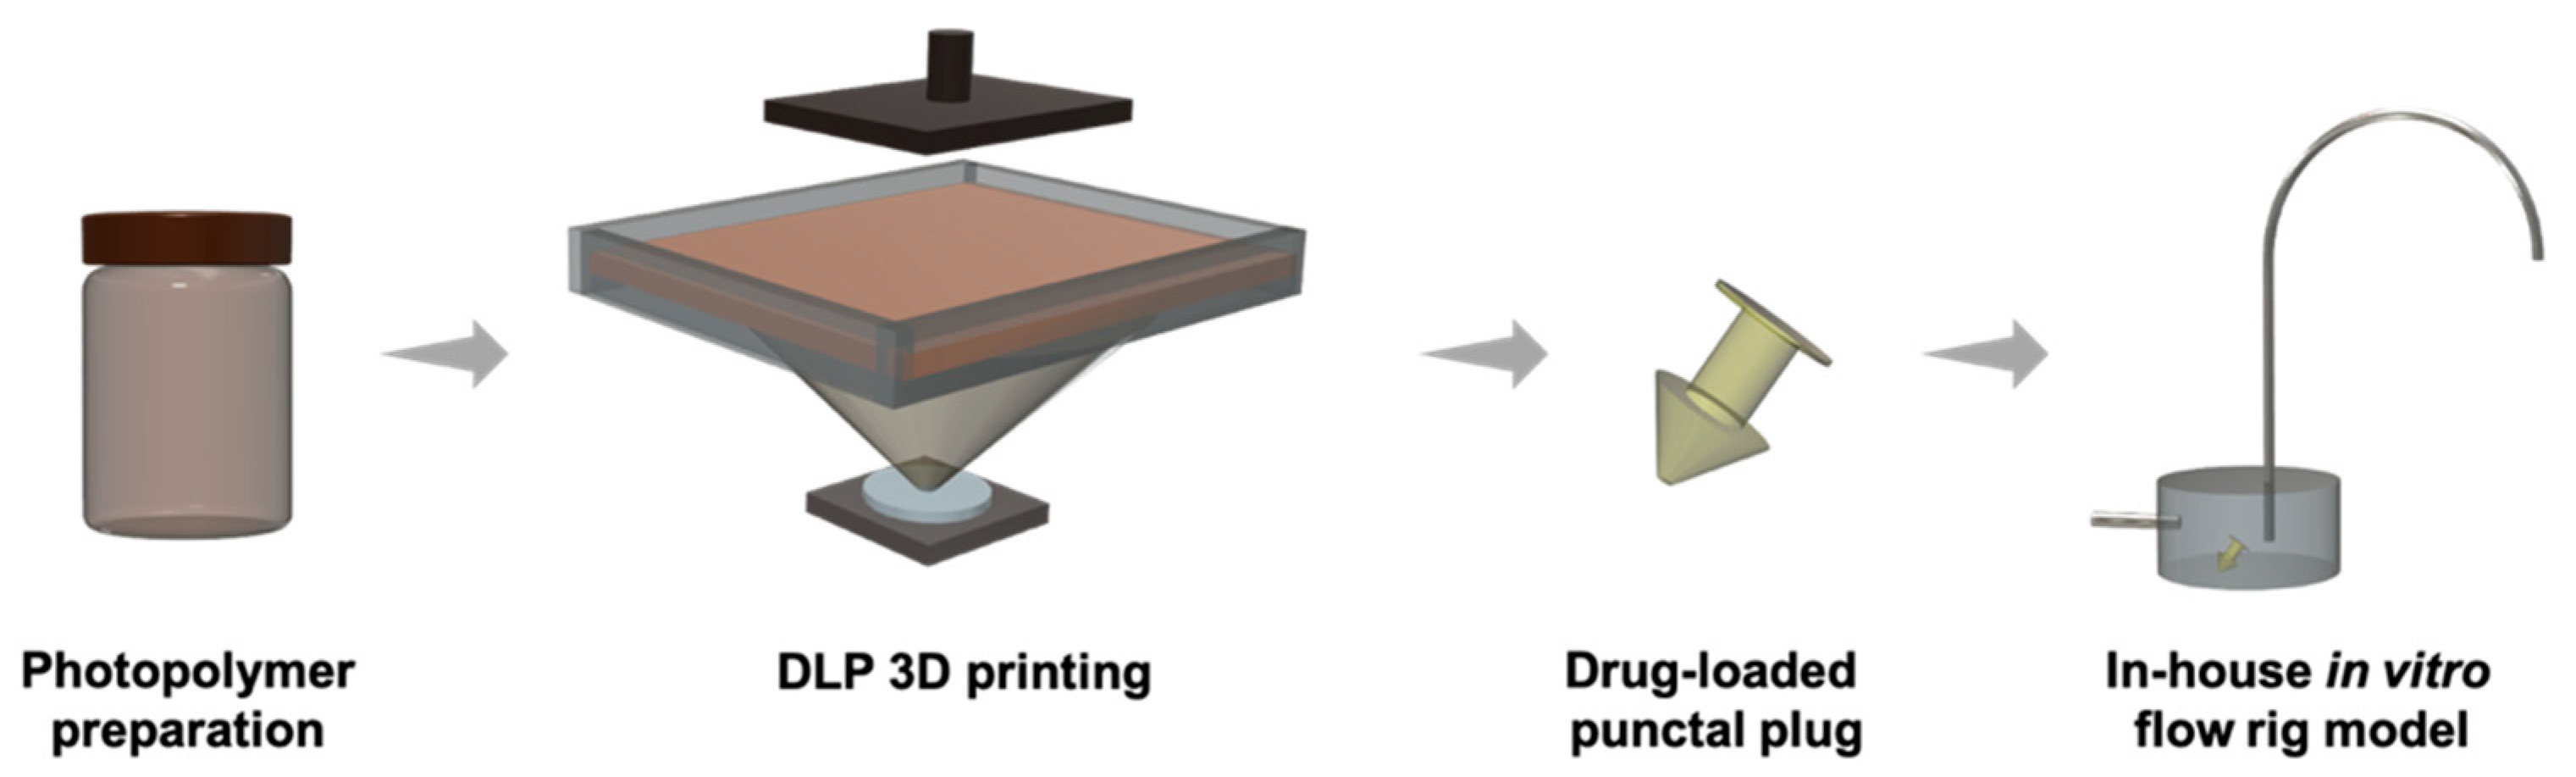 The DLP 3D printing process and in-house flow rig model for in vitro dissolution studies. Image via MDPI.